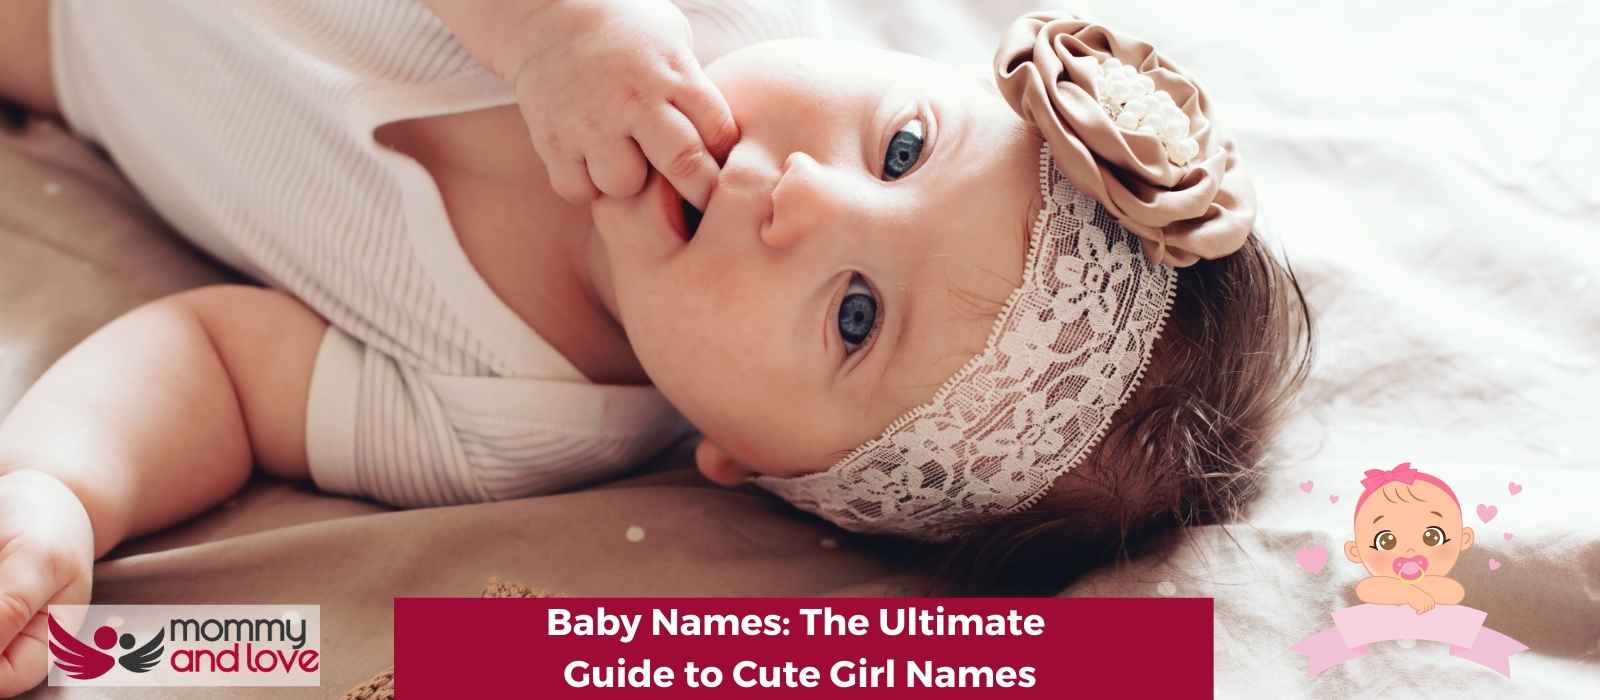 Baby Names: The Ultimate Guide to Cute Girl Names